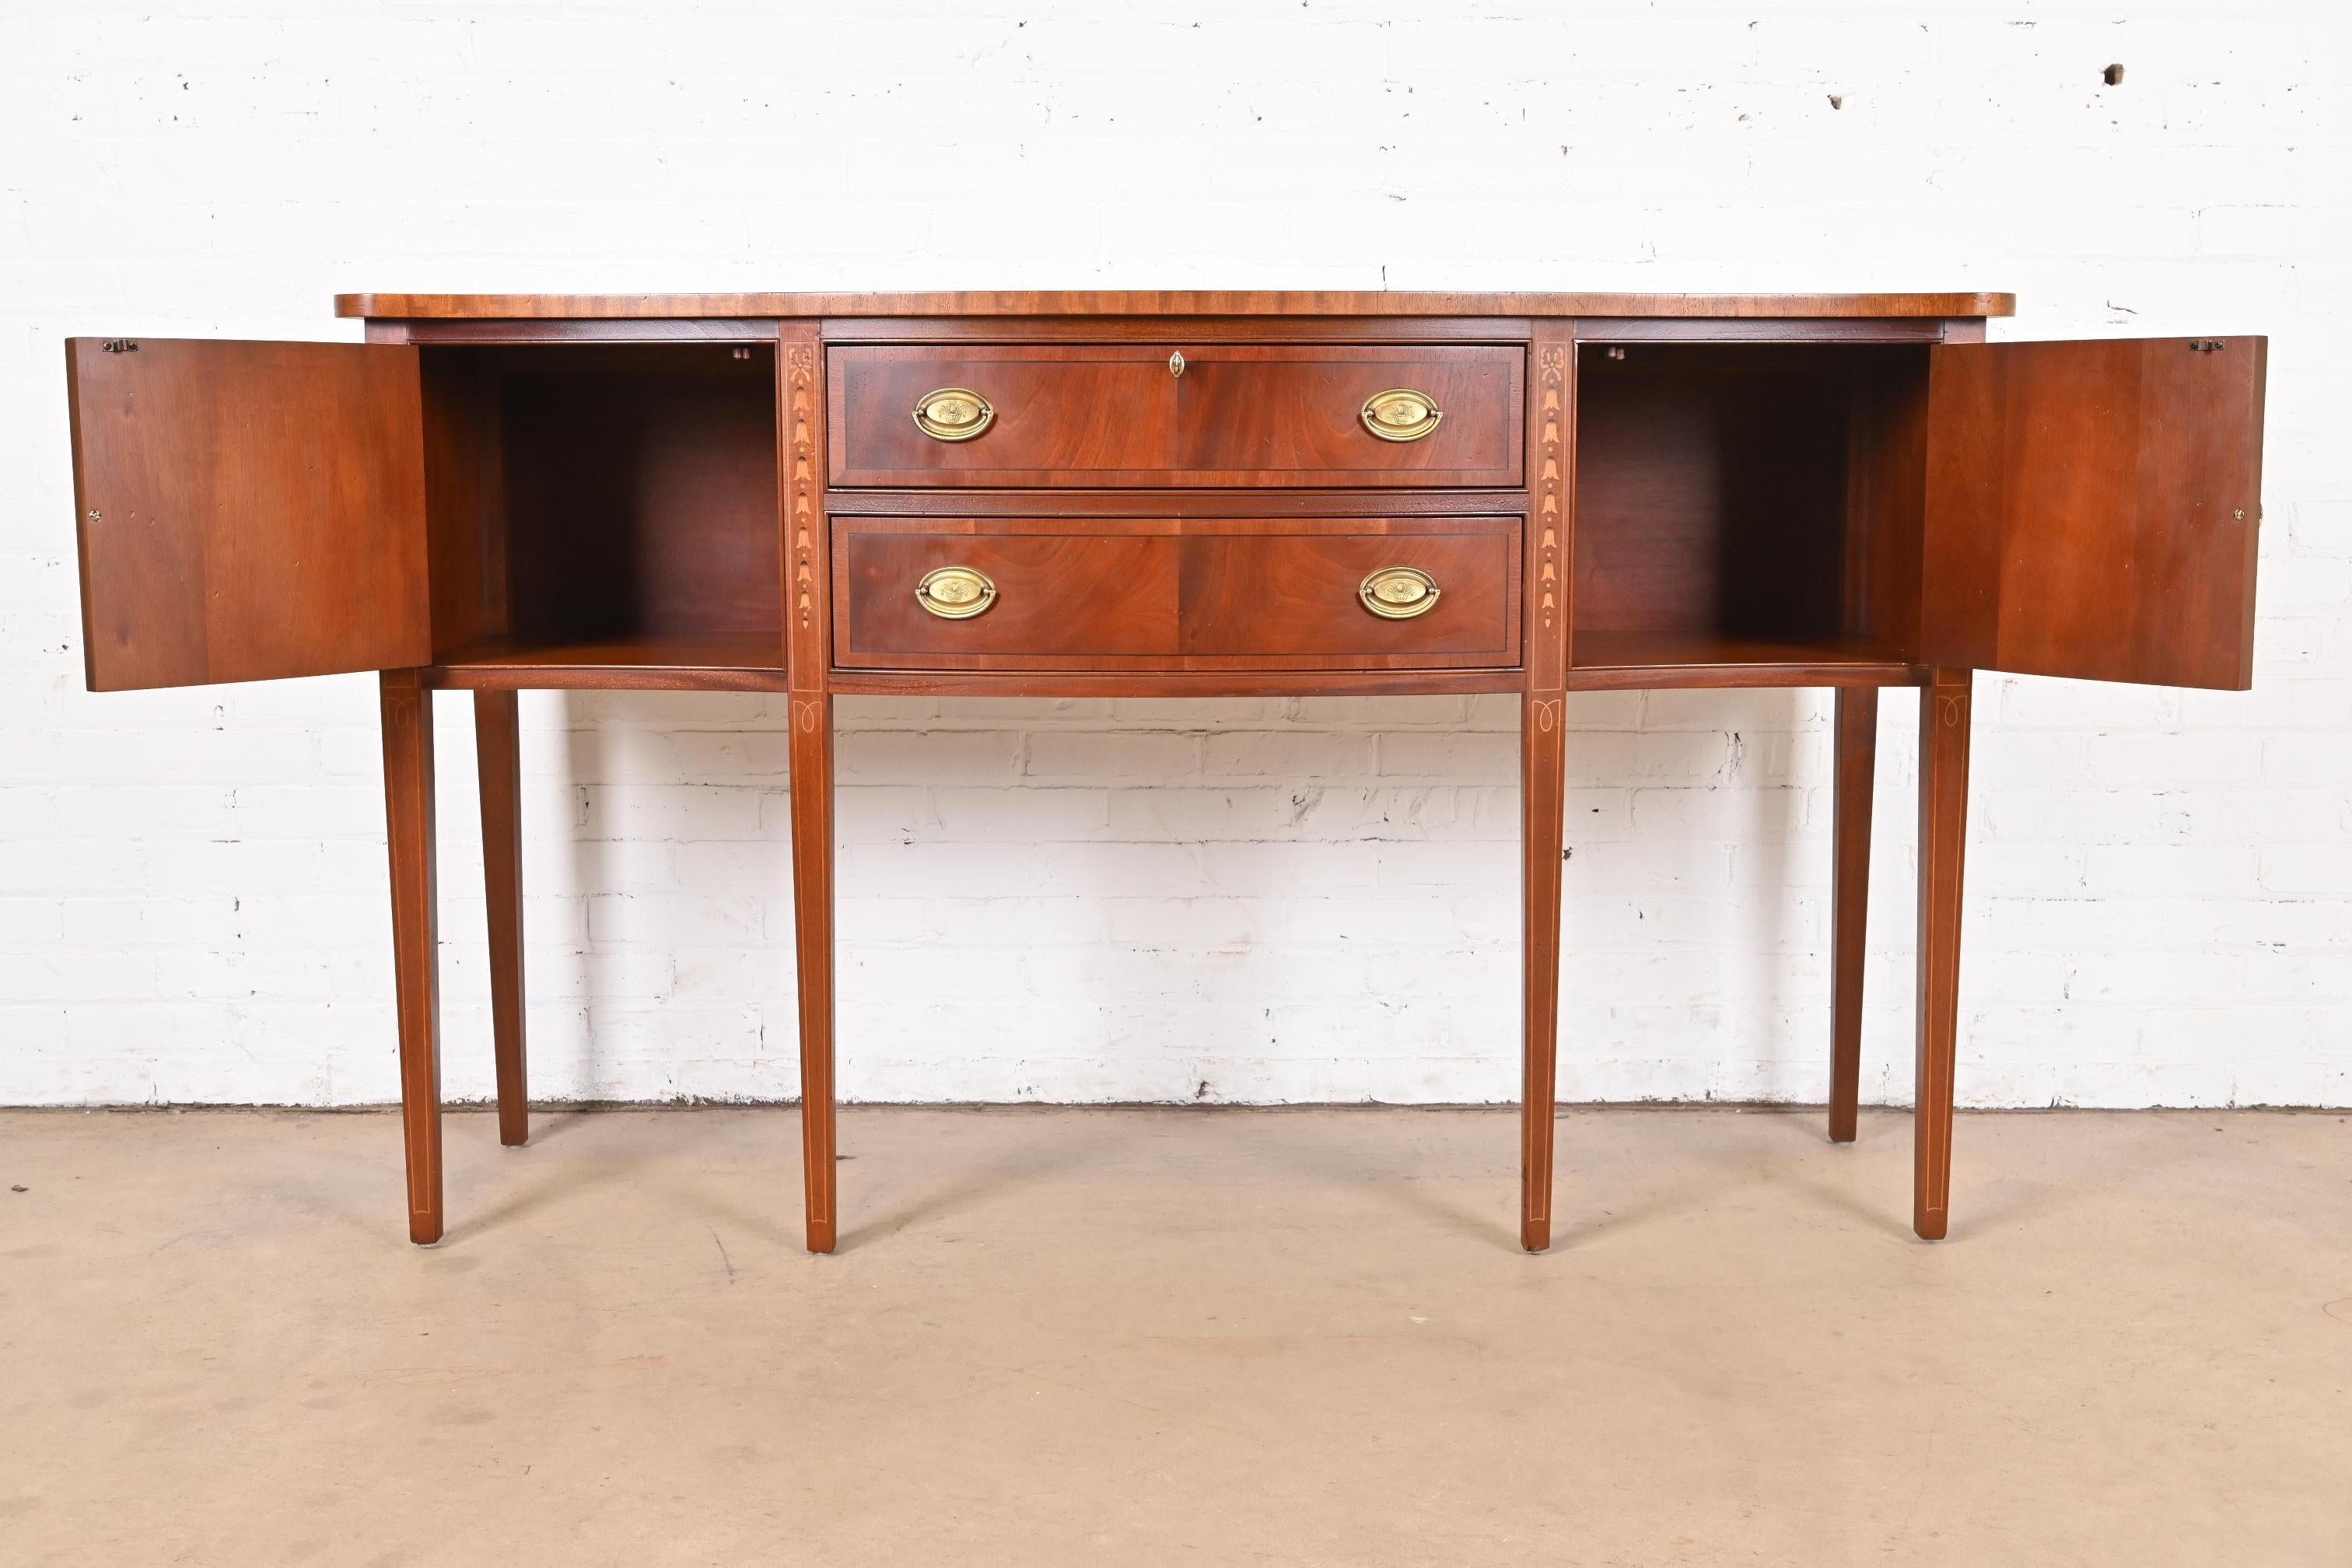 Hepplewhite Inlaid Mahogany Serpentine Front Sideboard Buffet or Credenza 8